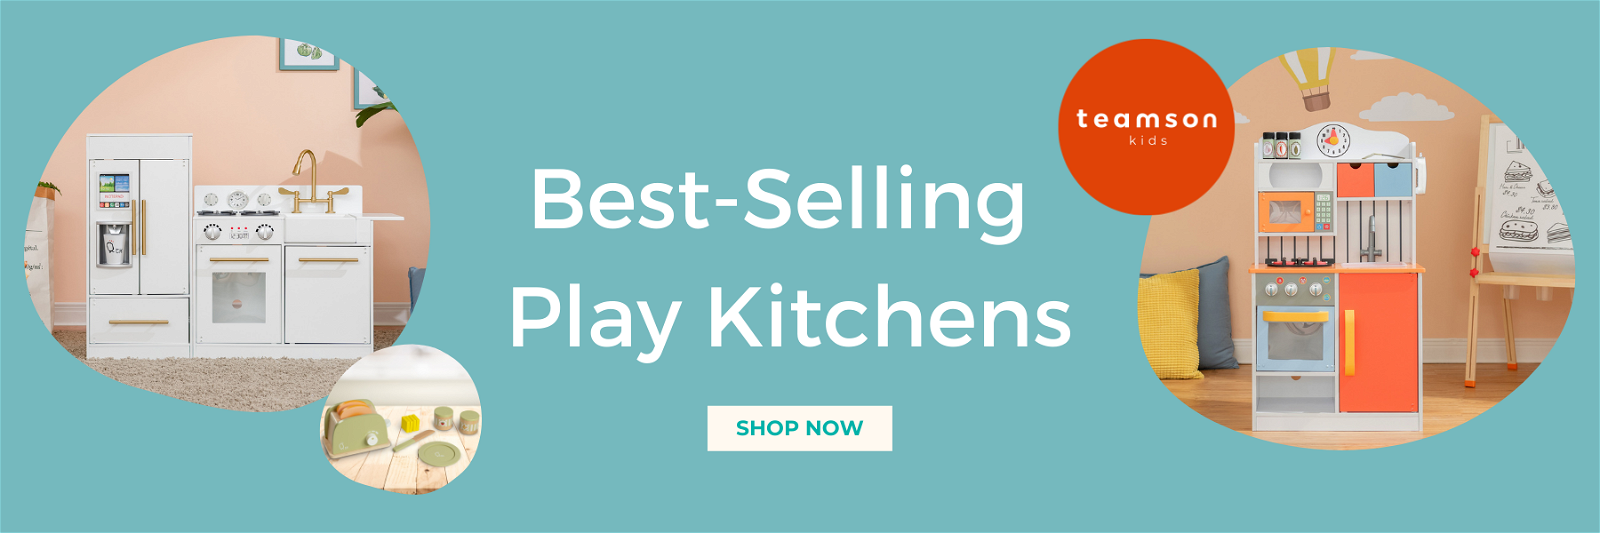 Play kitchens